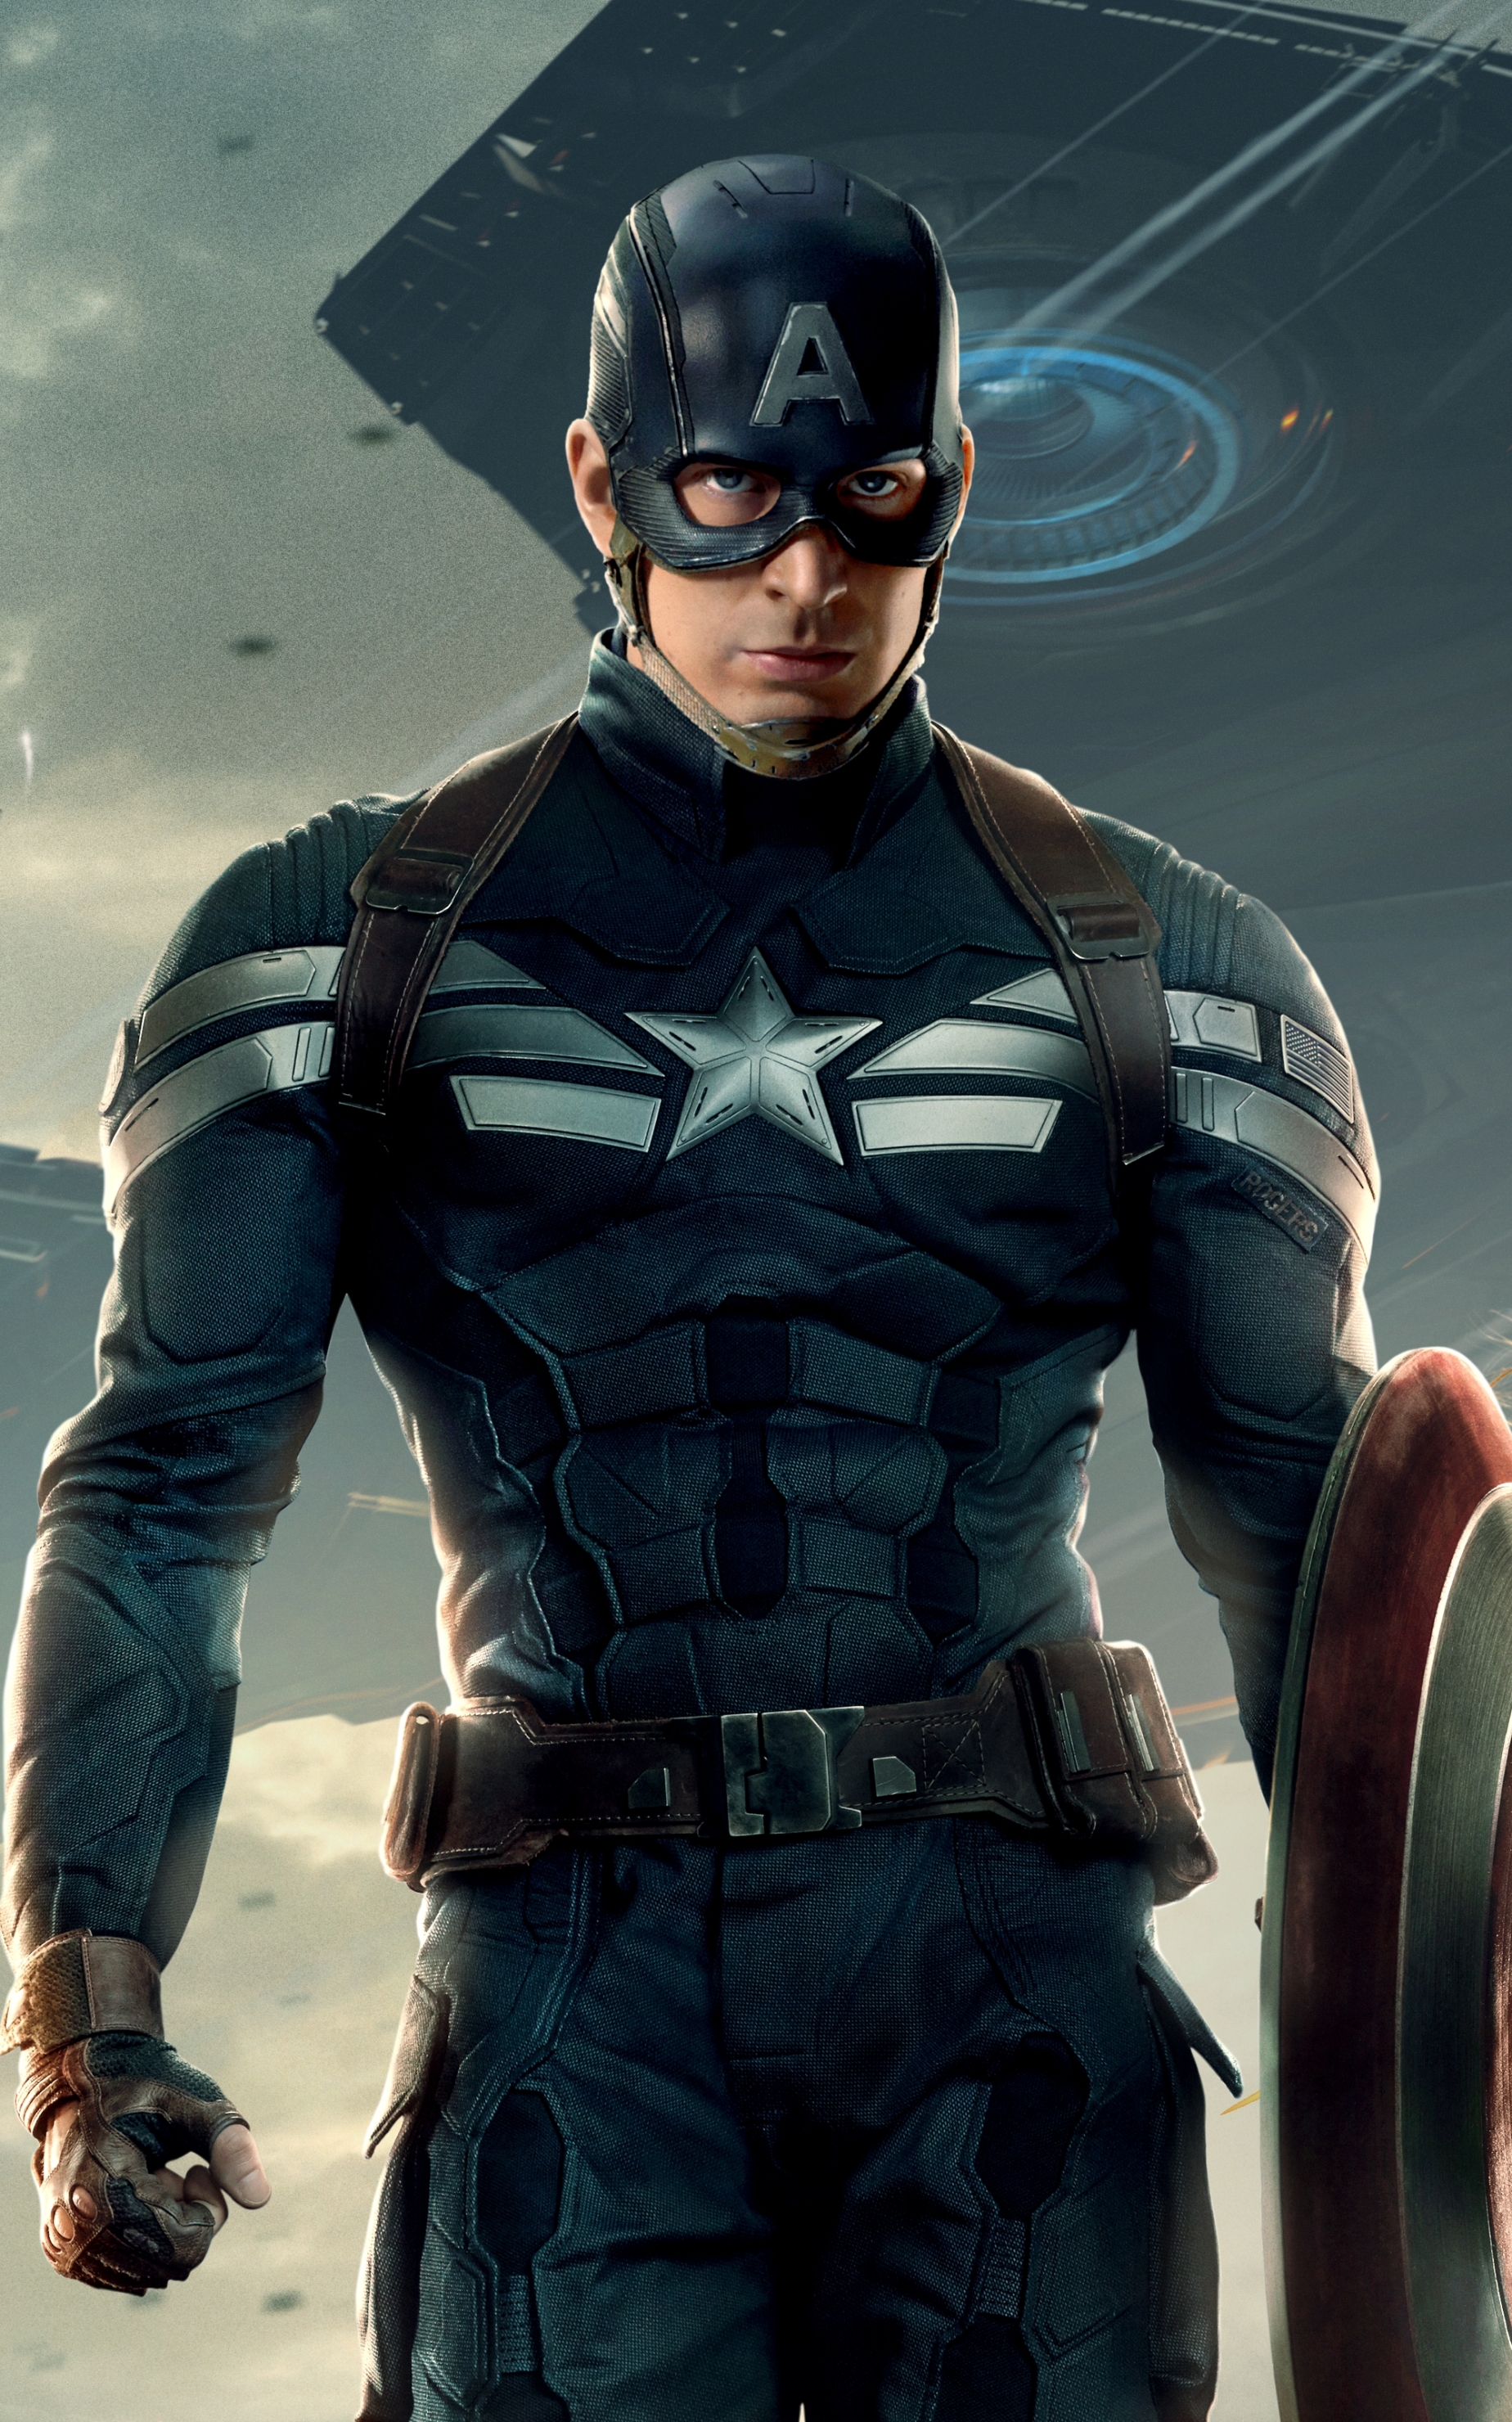 Captain America: The Winter Soldier Phone Wallpaper - Mobile Abyss